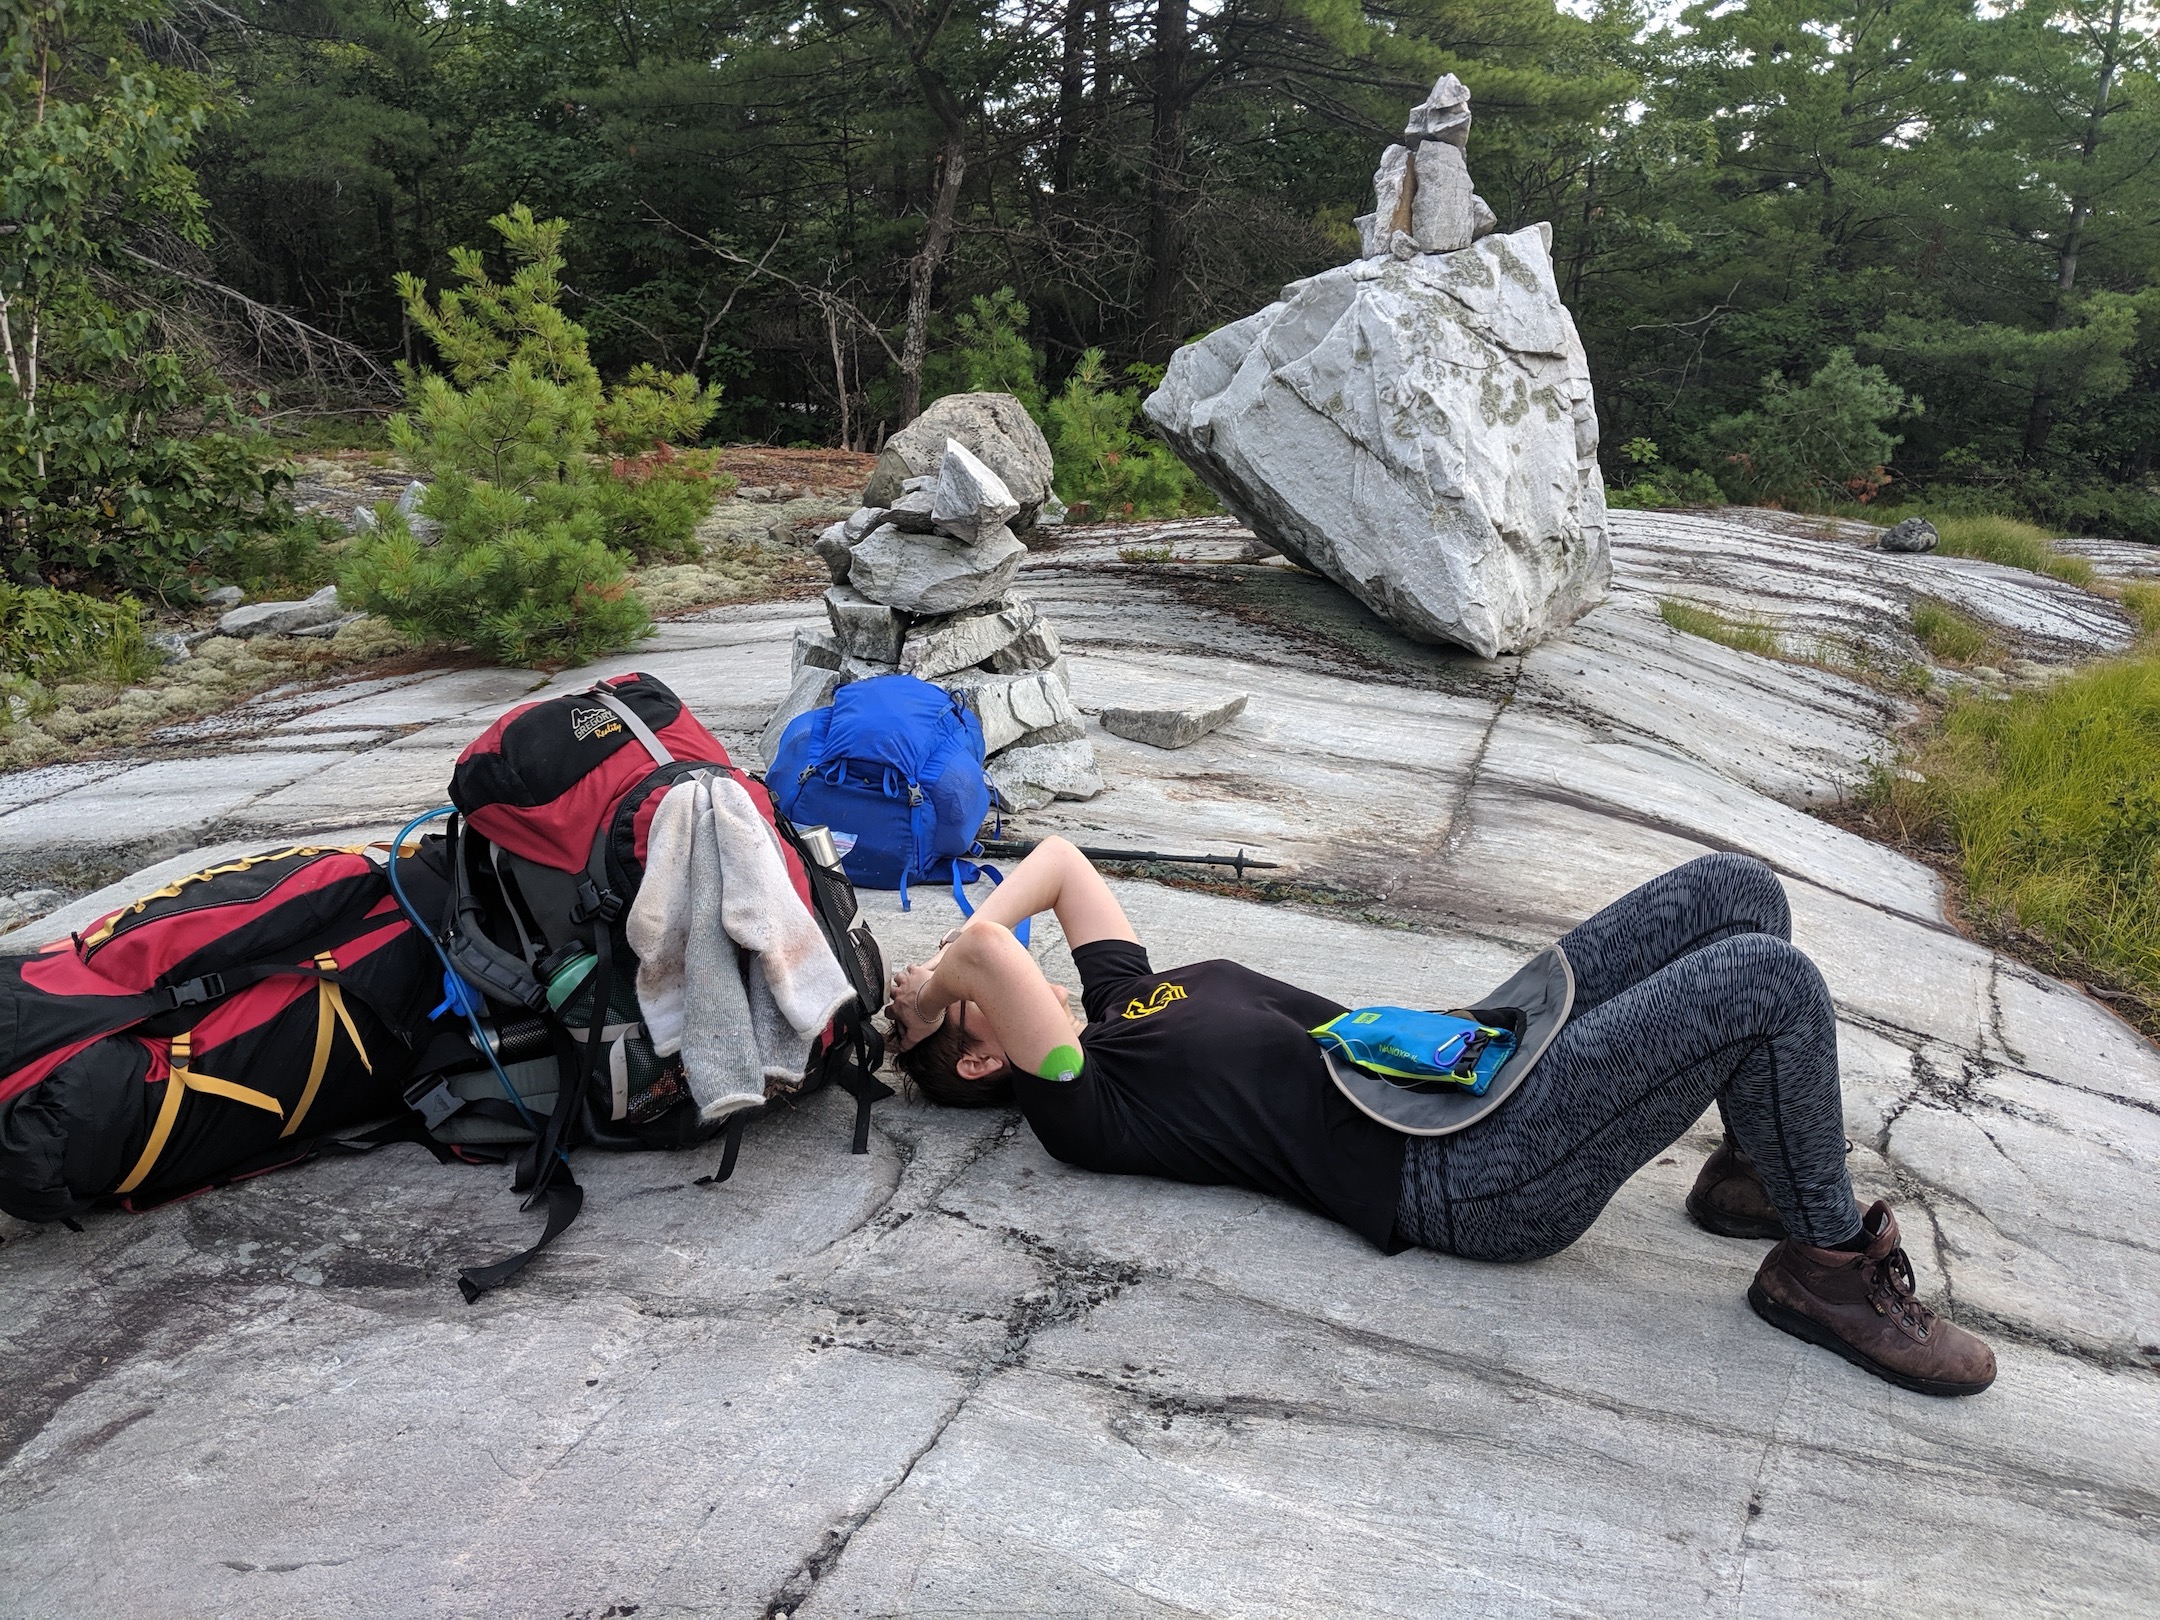 Me stretched out on a rock during a short break, totally miserable. I strongly recommend against getting sick in the backcountry when the only way out is onward.